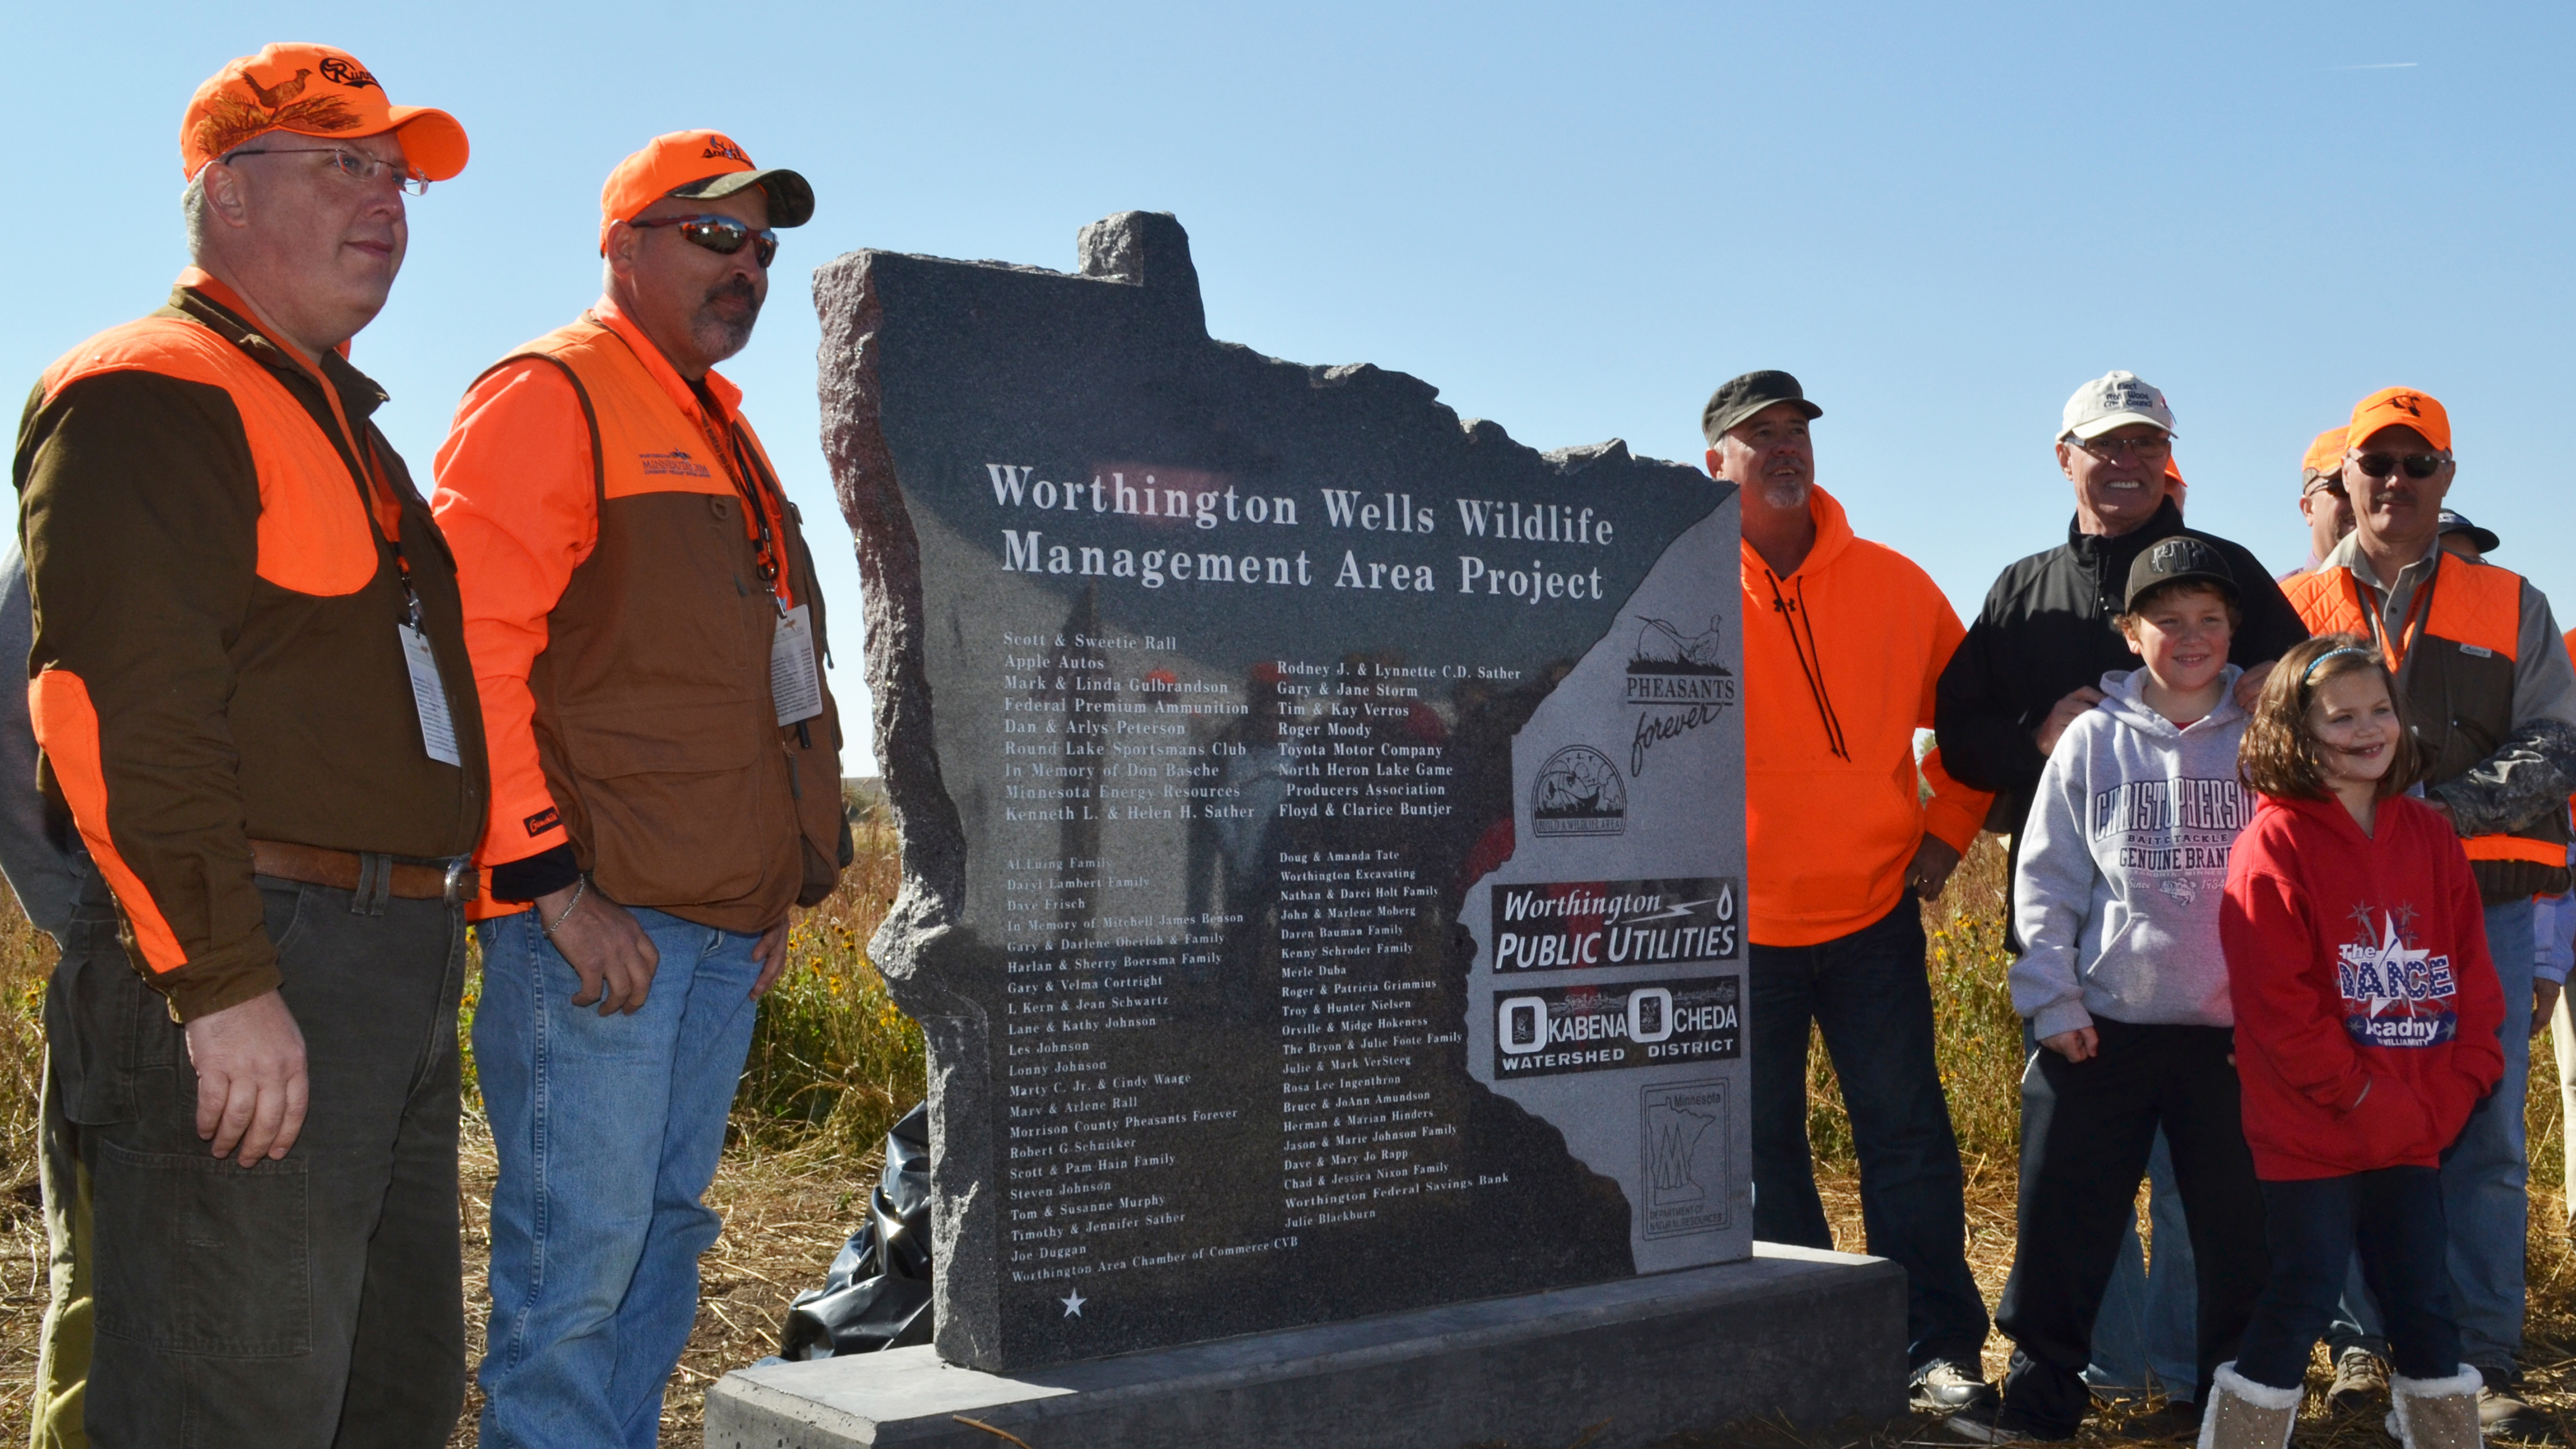  Group of people standing by the Worthington Wells Wildlife Management Area Project sign outdoors 